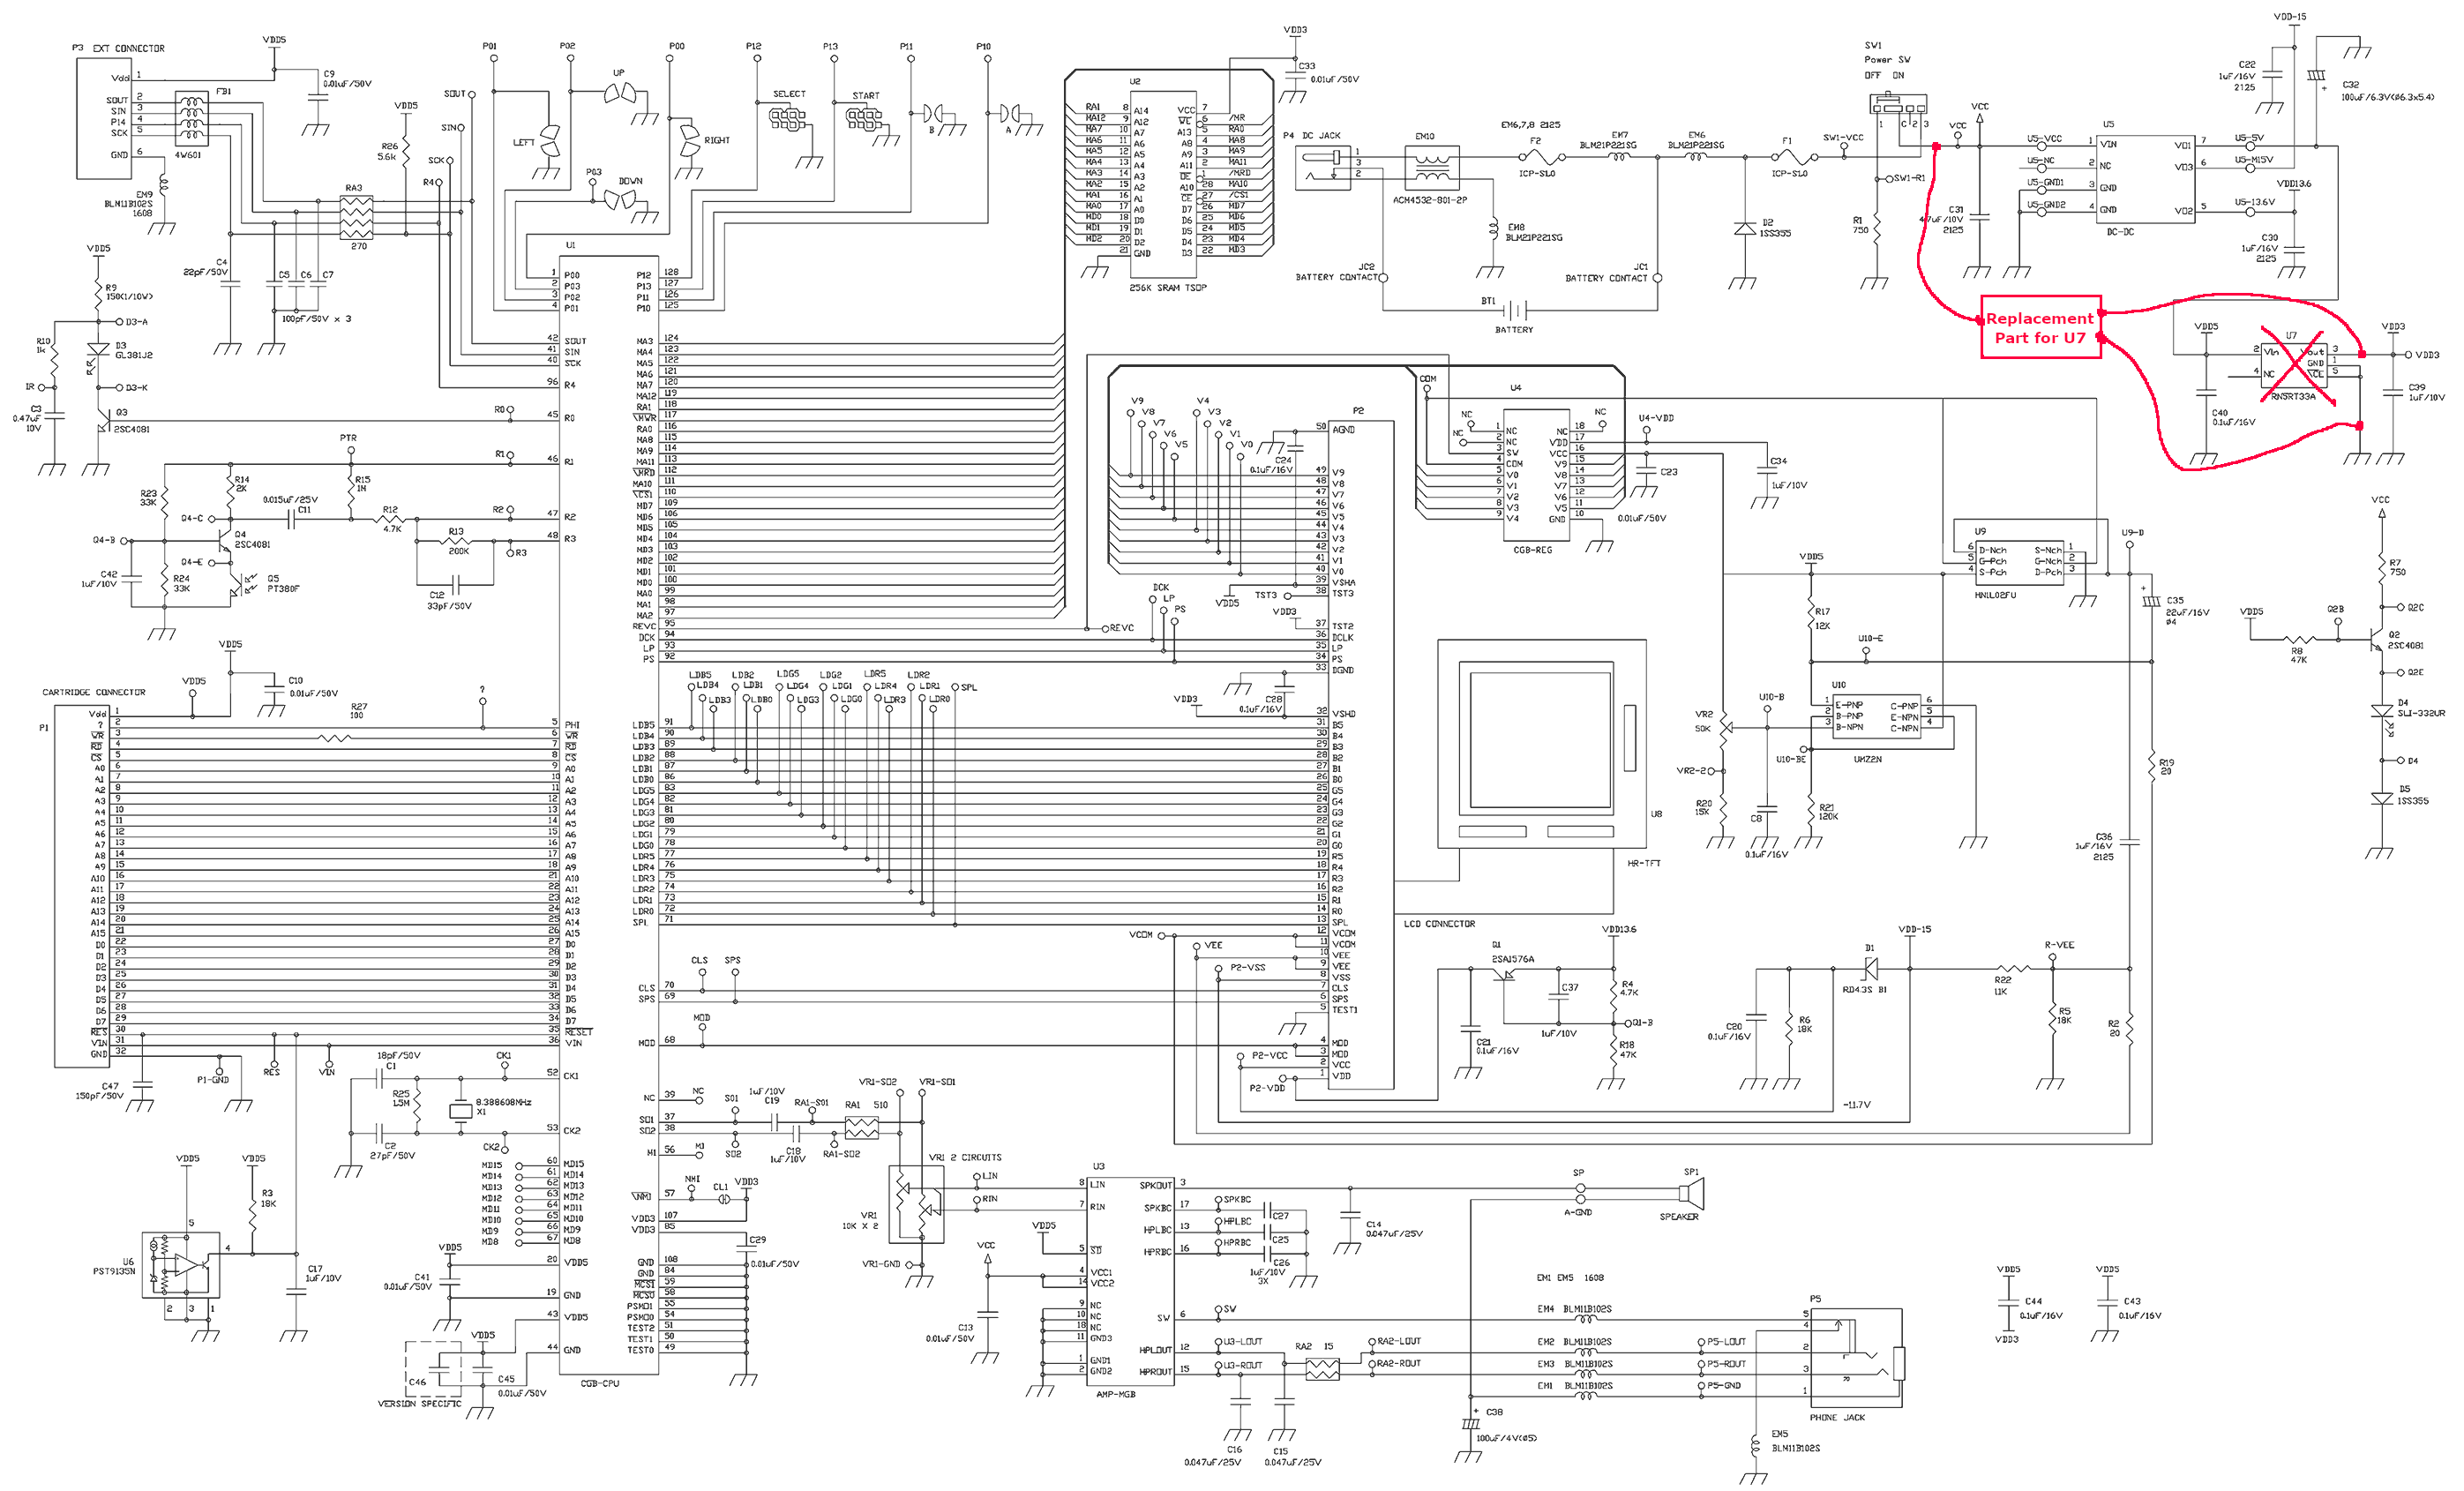 Schematic with replacement